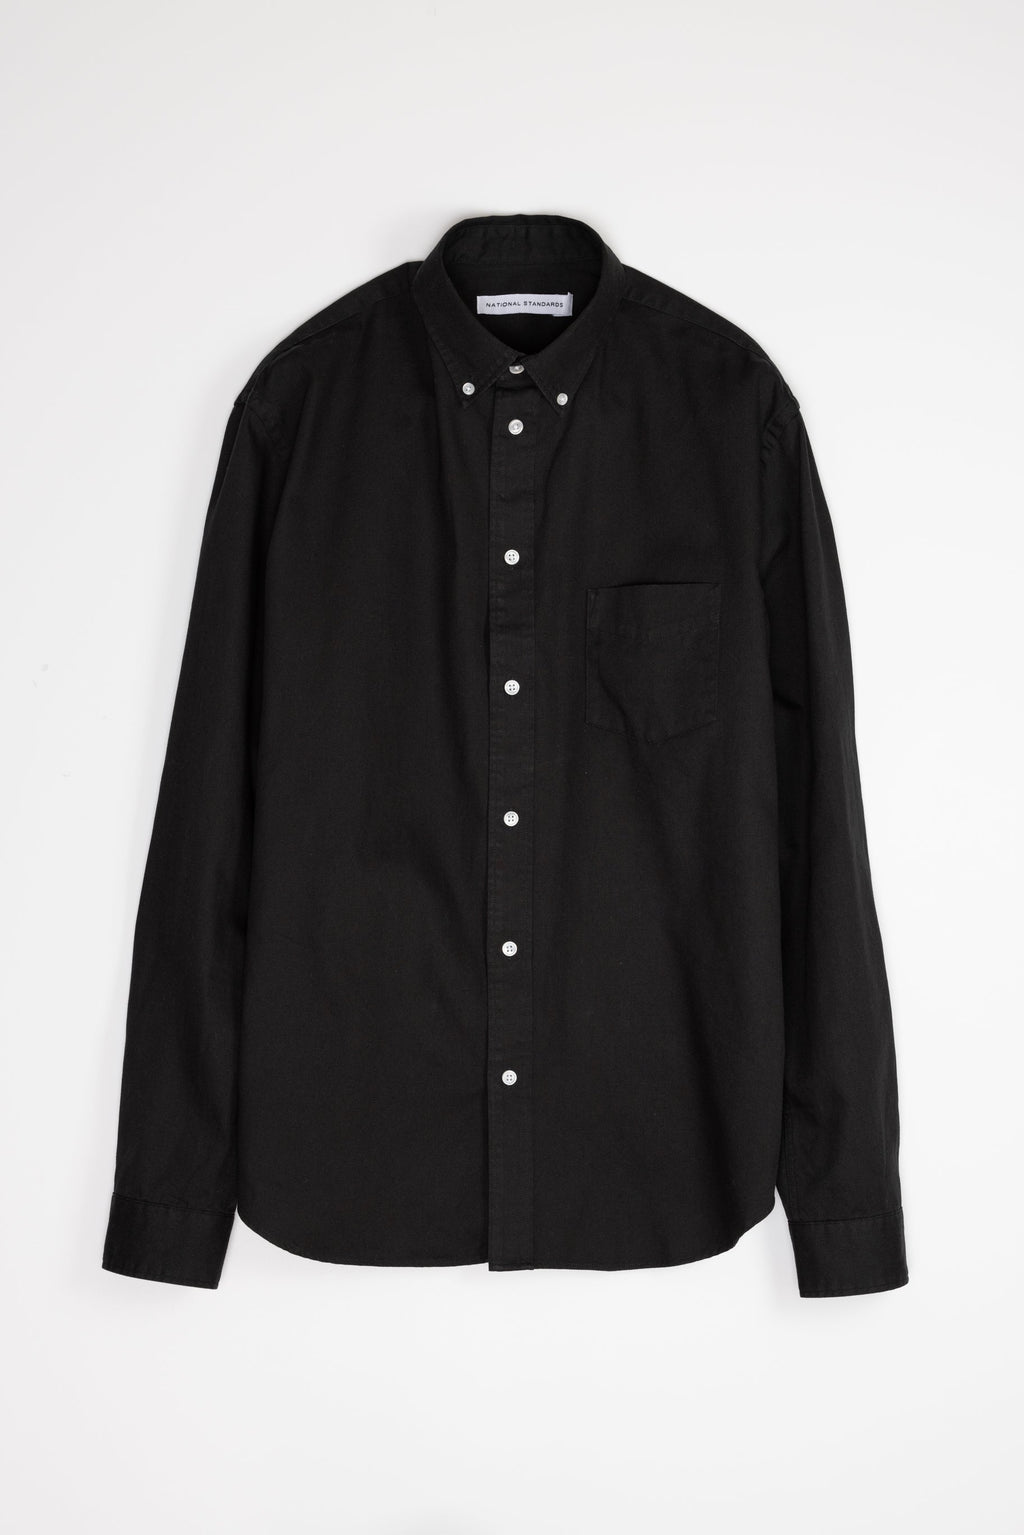 Japanese Washed Oxford in Black 01